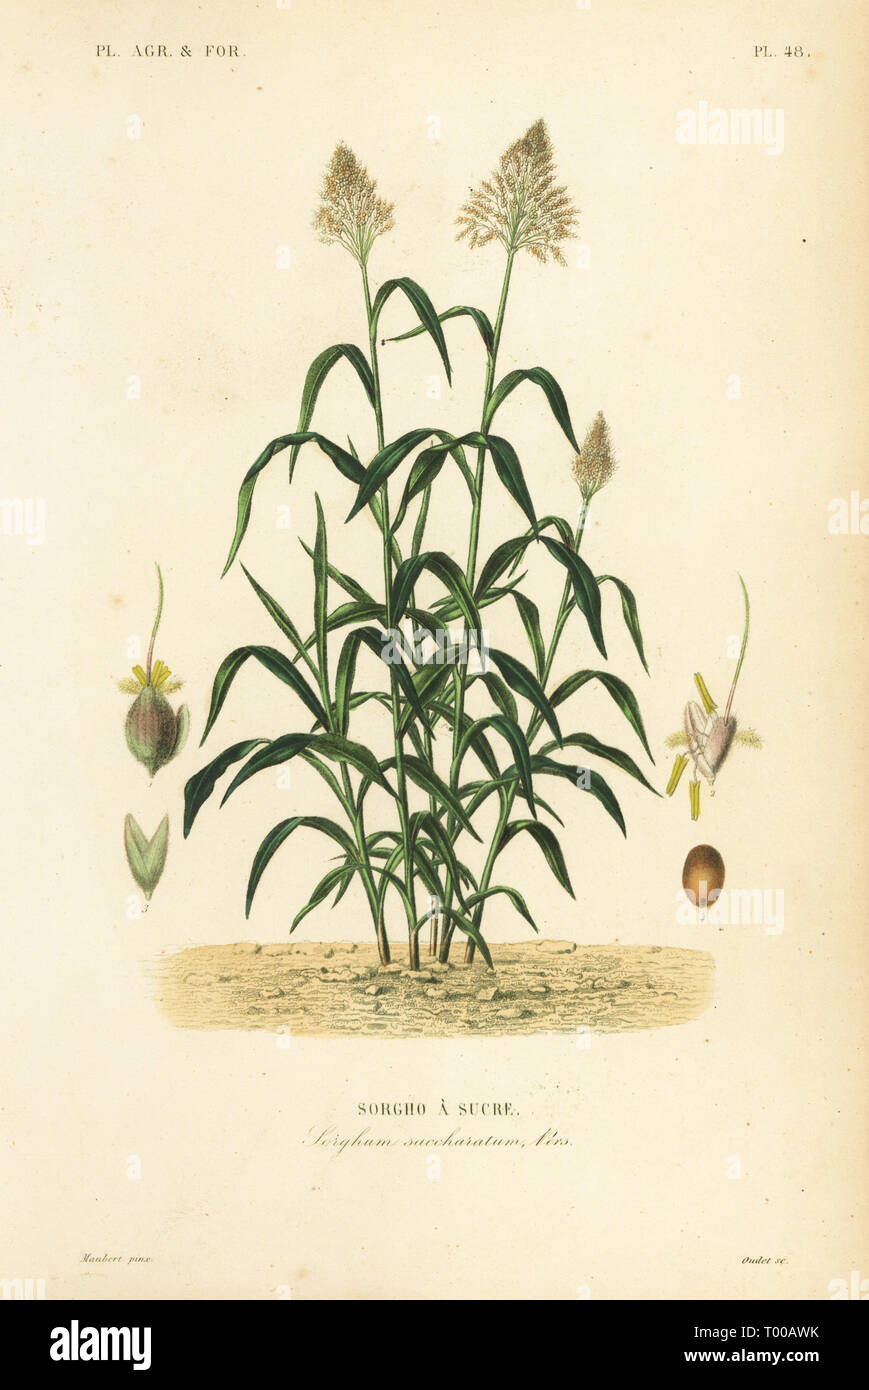 Sorghum grass, great millet, durra, jowari or milo, Sorghum bicolor, Sorghum saccharatum, Sorgho a sucre. Handcoloured steel engraving by Oudet after a botanical illustration by Edouard Maubert from Pierre Oscar Reveil, A. Dupuis, Fr. Gerard and Francois Herincq’s La Regne Vegetal: Planets Agricoles et Forestieres, L. Guerin, Paris, 1864-1871. Stock Photo